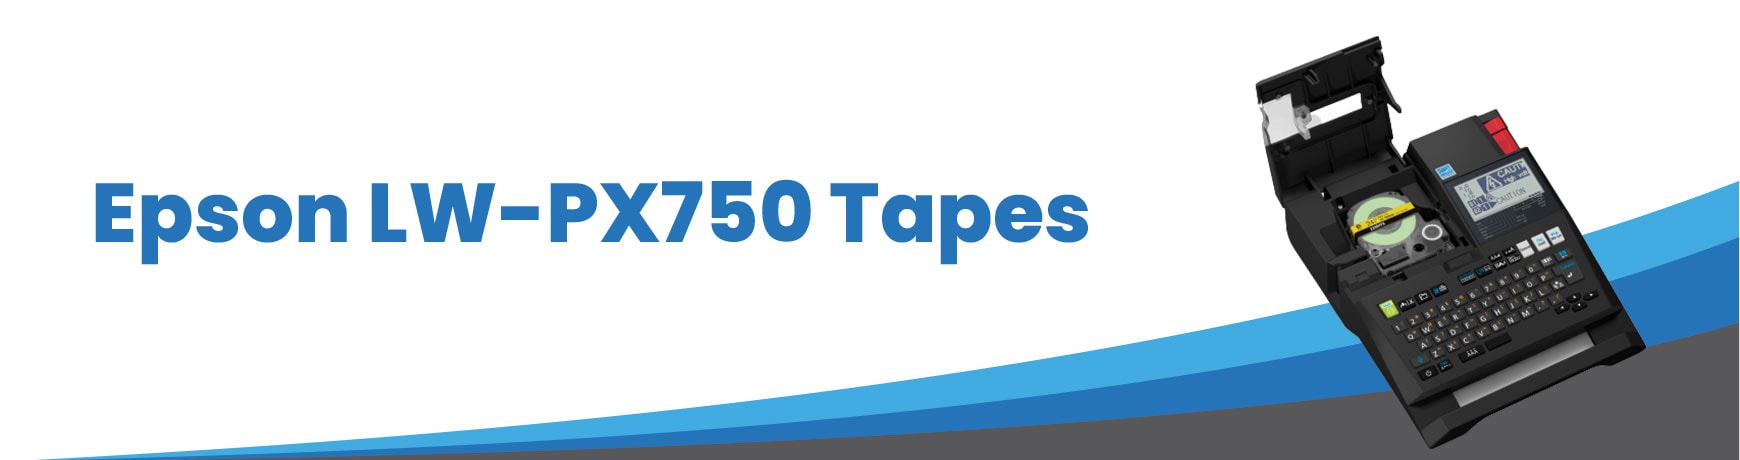 Epson LW-PX750 Tapes